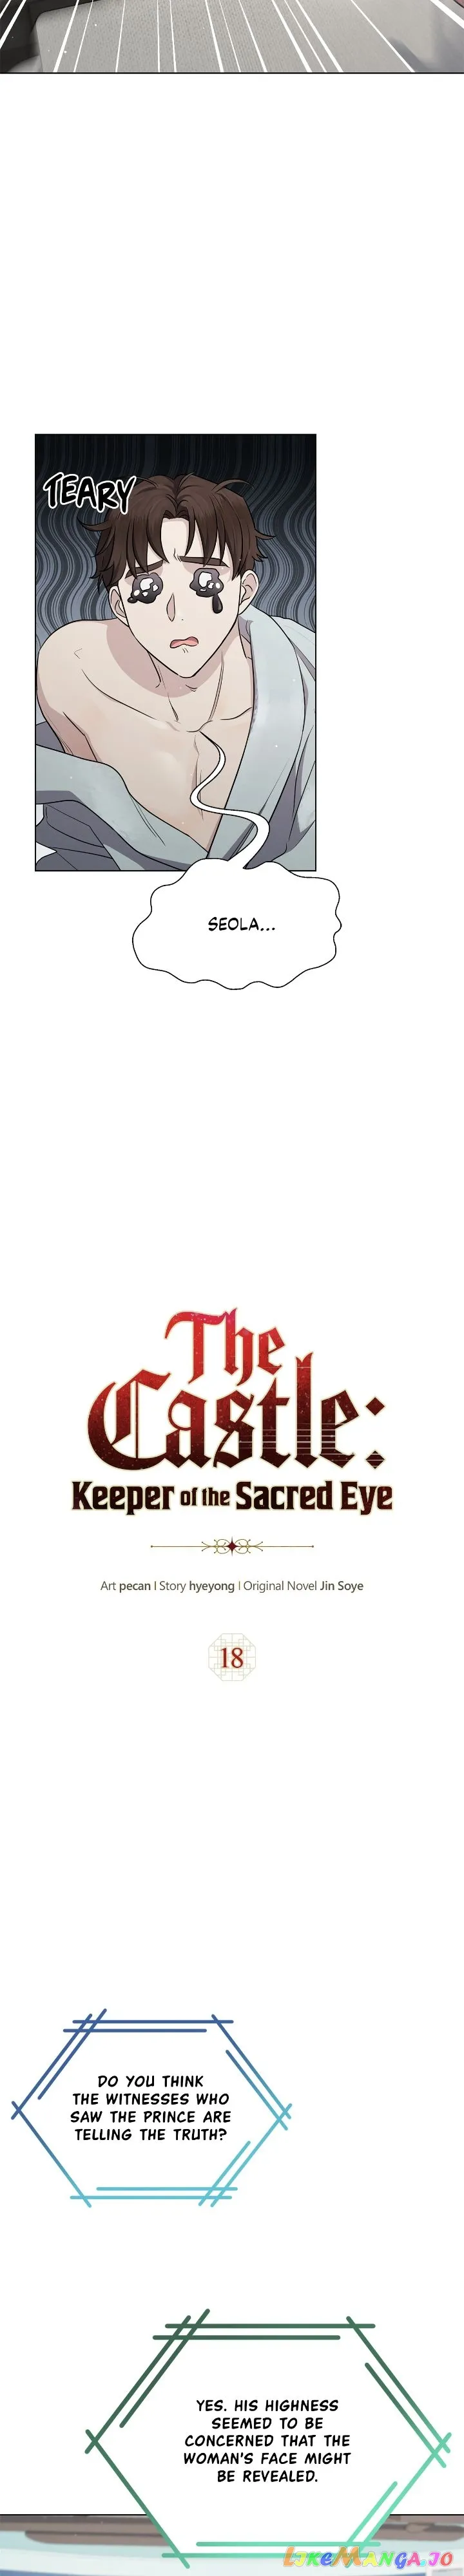 The Castle: Ghost-eyed Bride chapter 18